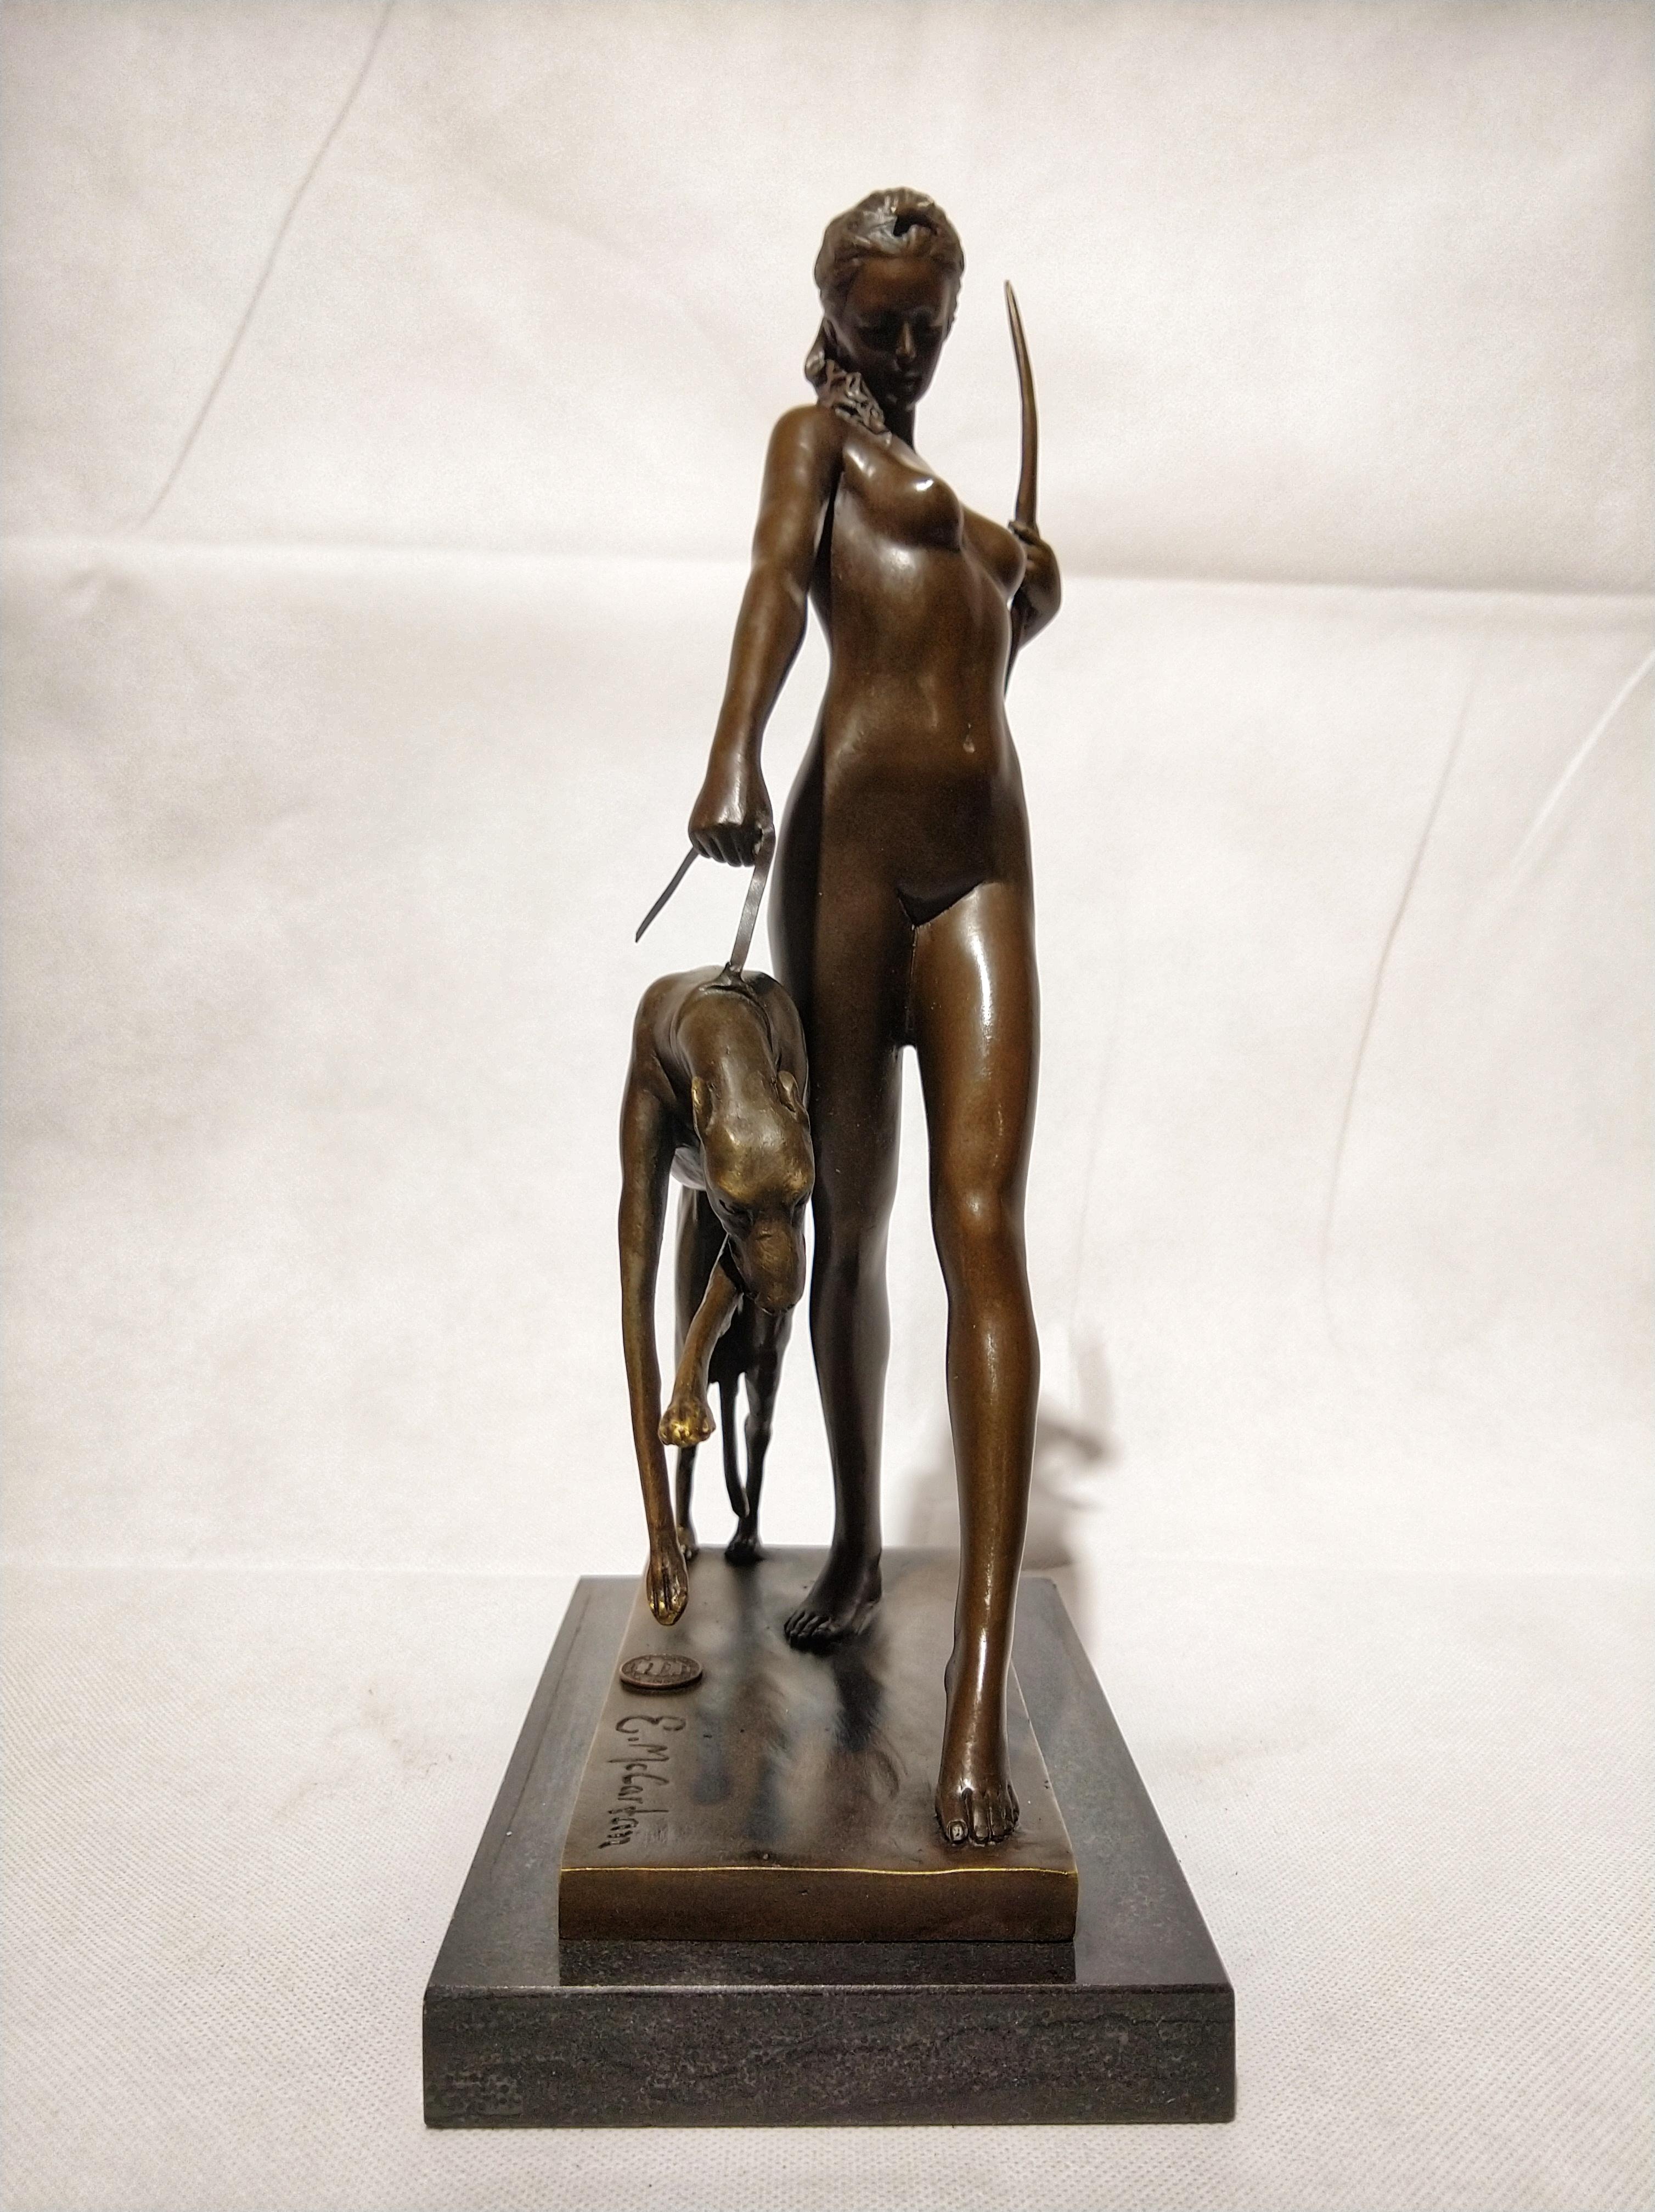 Beautiful Art Deco style sculpture, depicting naked diana, Roman goddess of hunting. In his right hand he holds his greyhound and in his left hand his bow. And is sitting on a black marble base. Signed E. McCartan, with bronze certificate